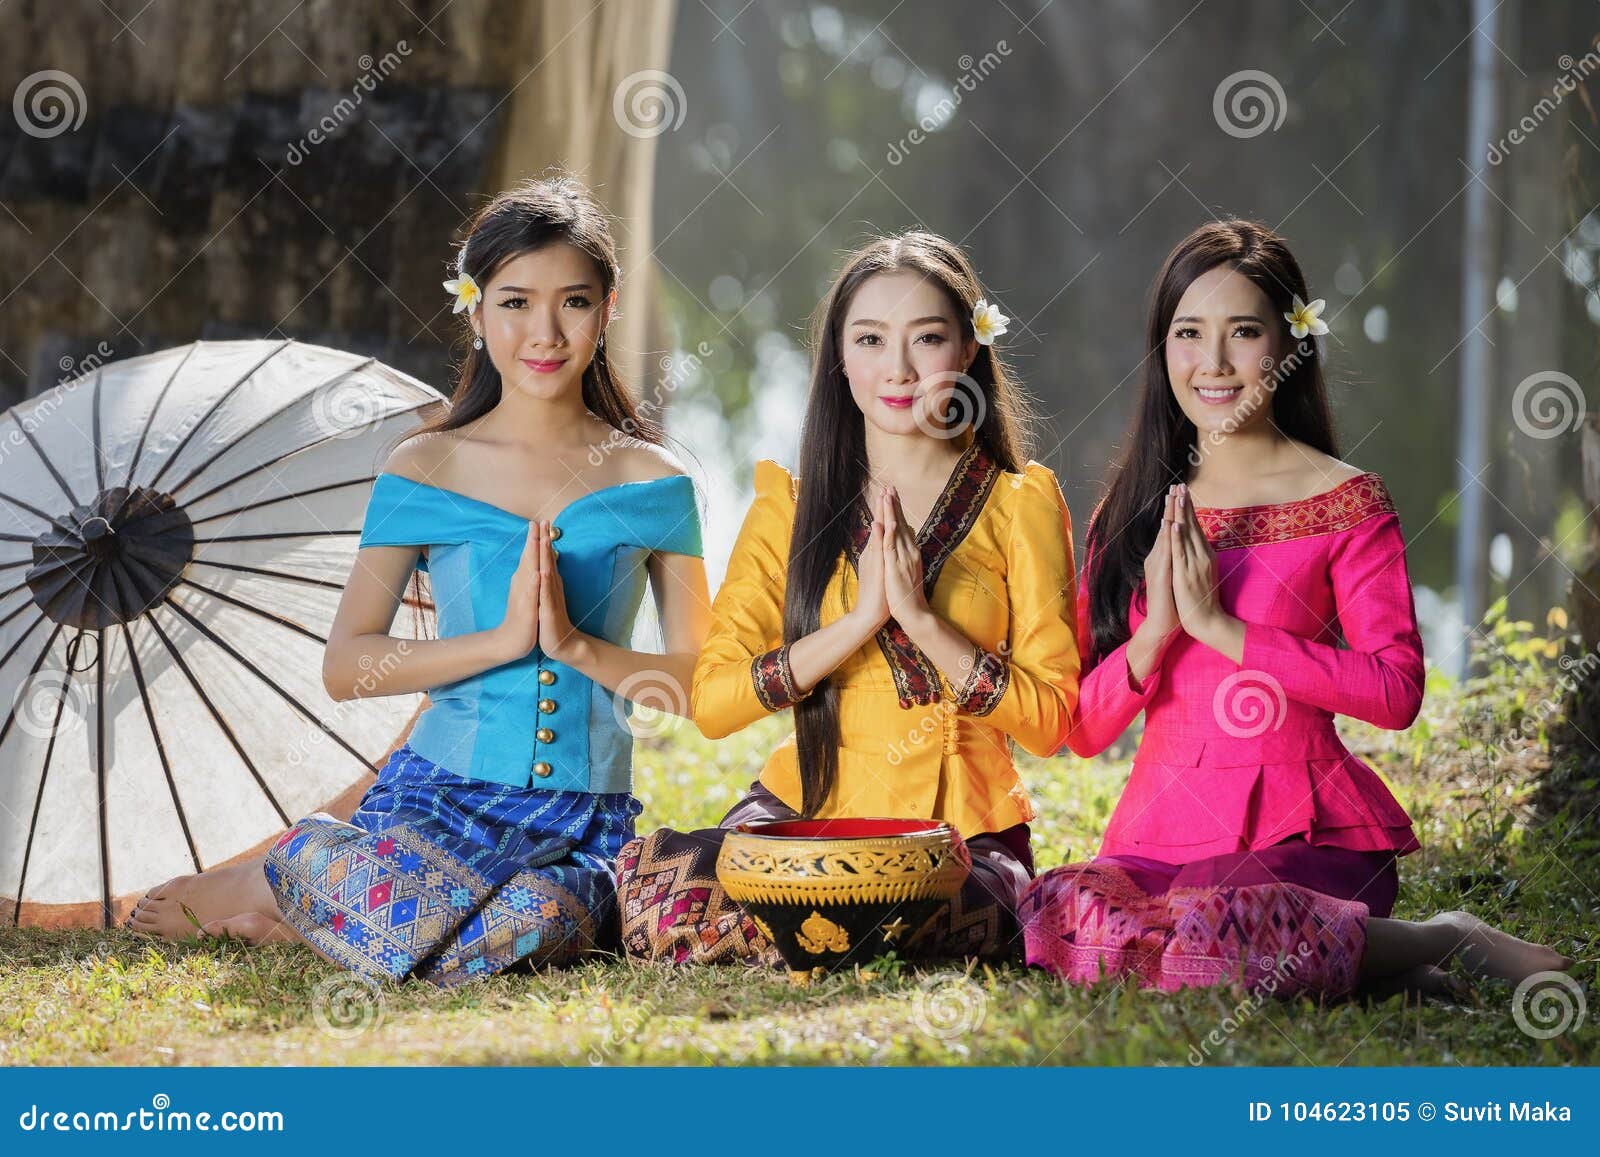 Culture laos women promotion and